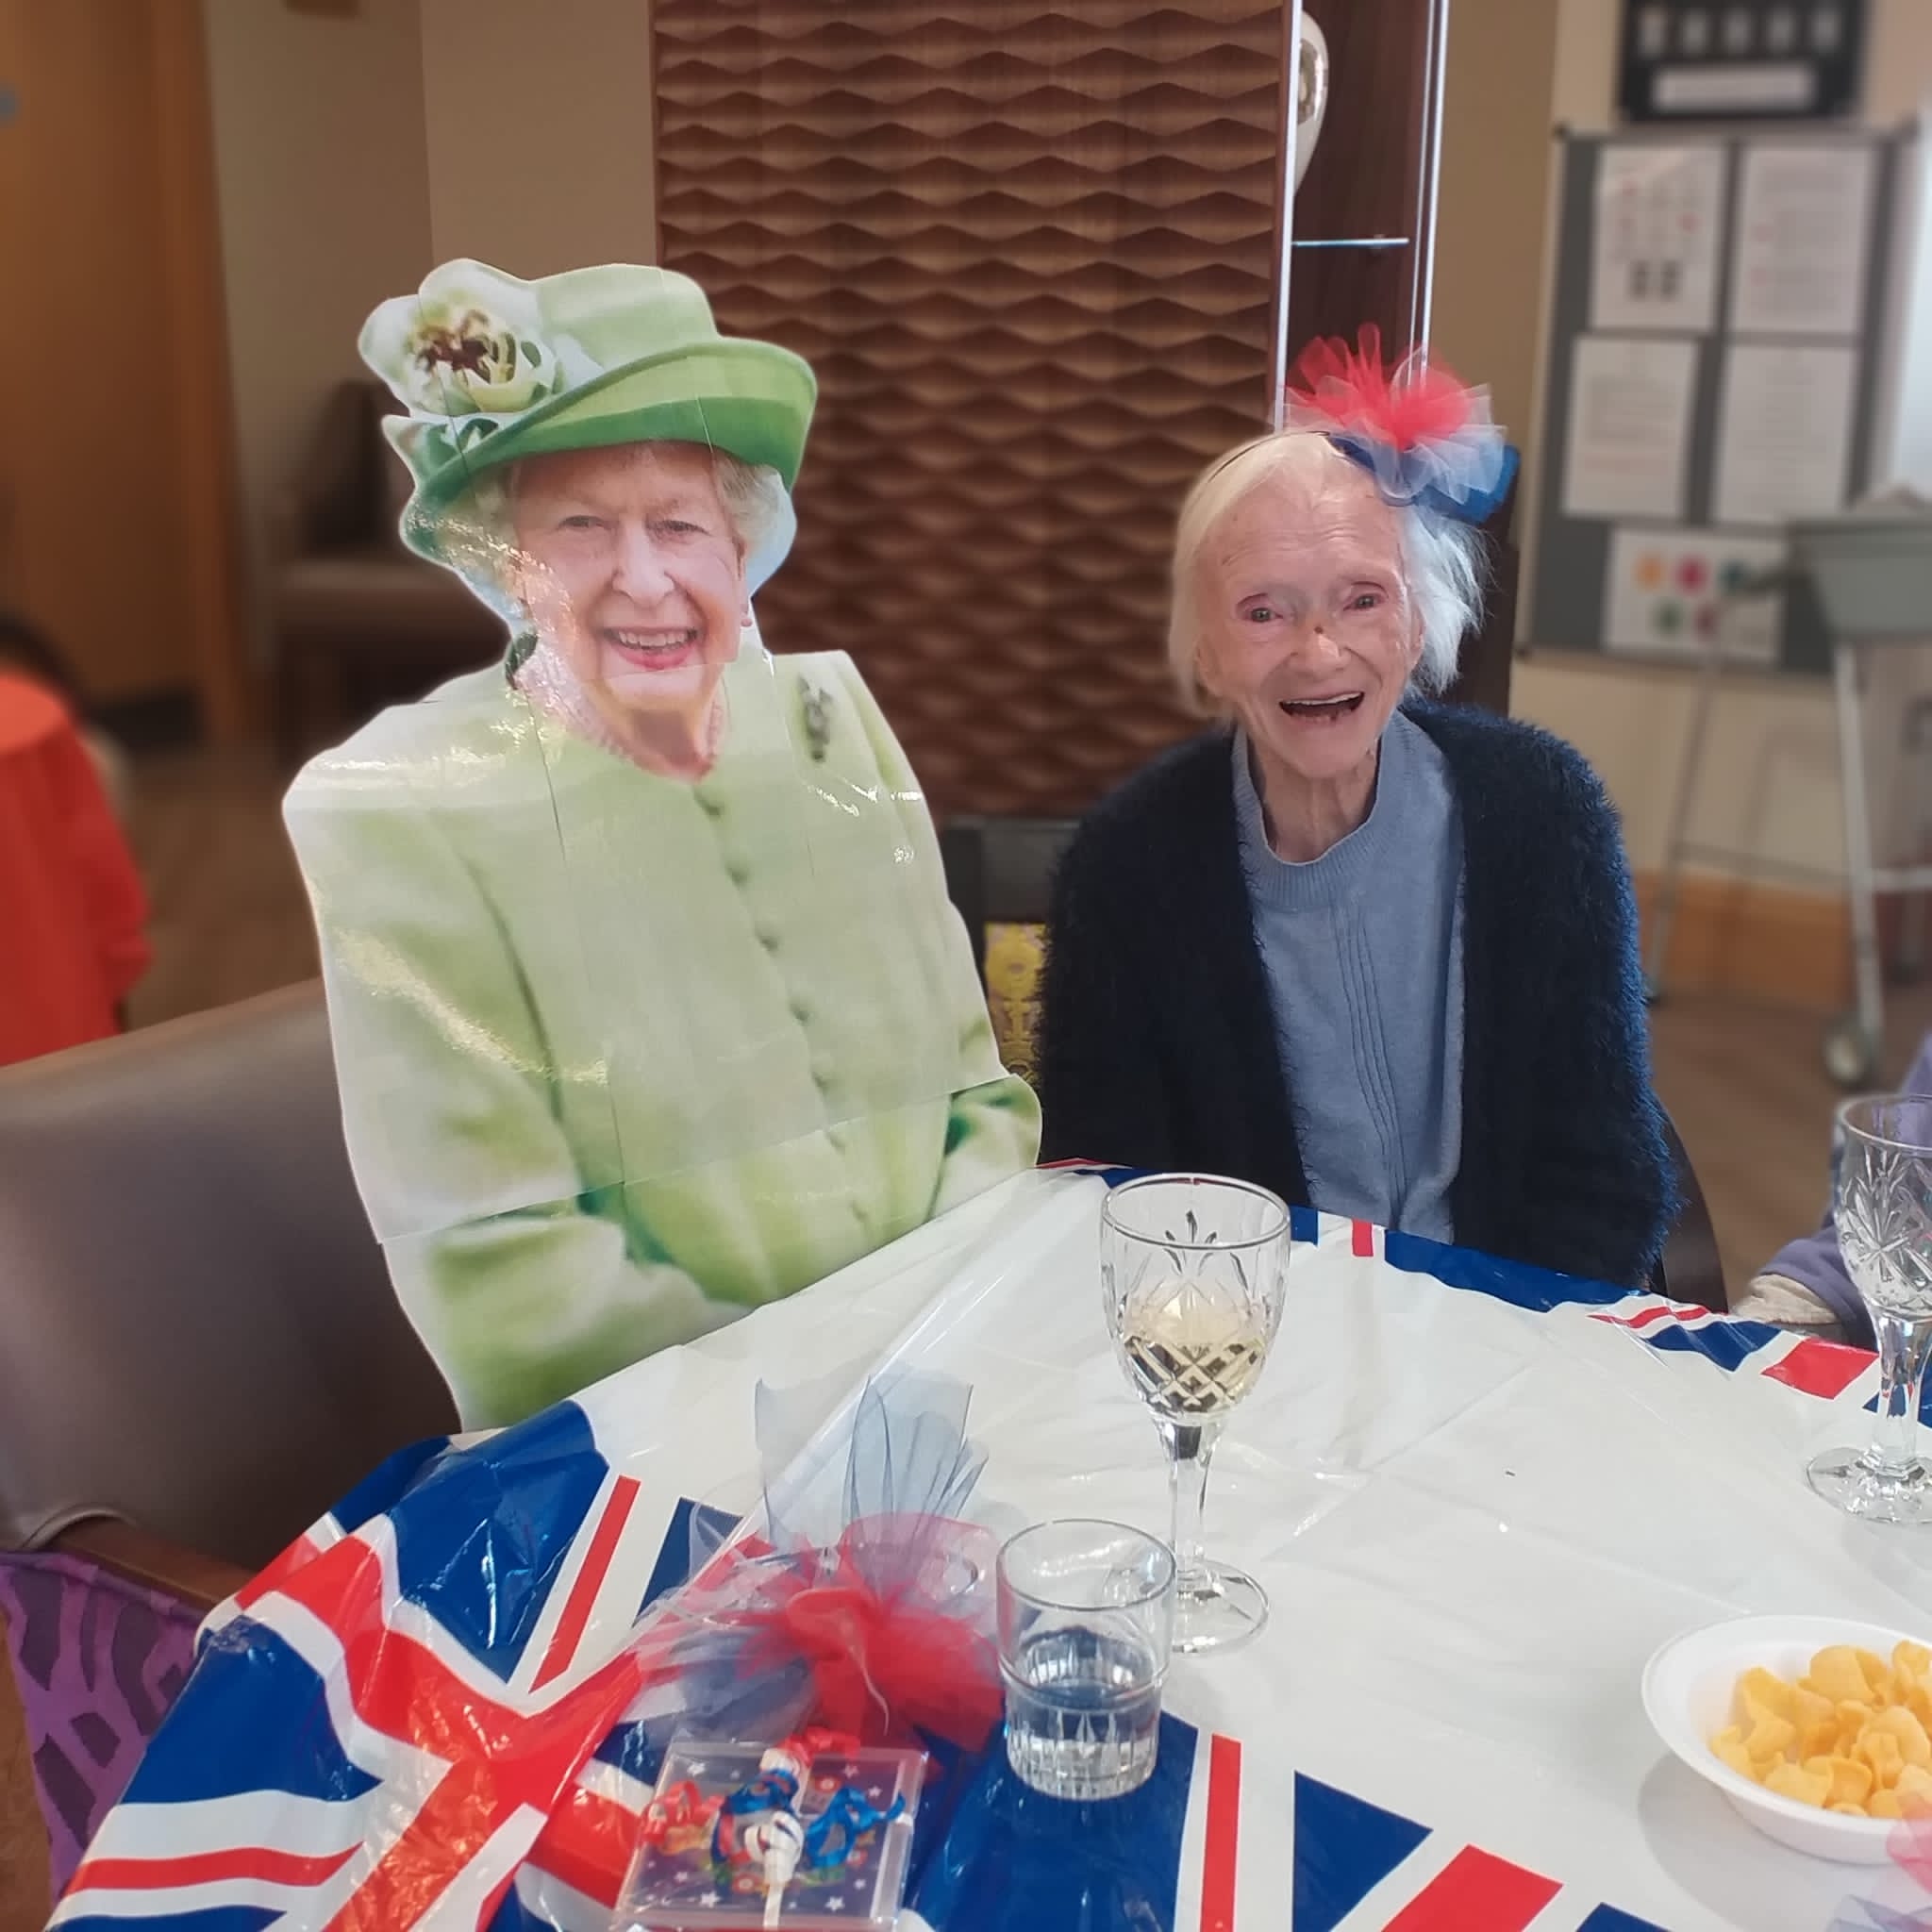 Resident Enjoying Royal Celebration With Queen Cutout